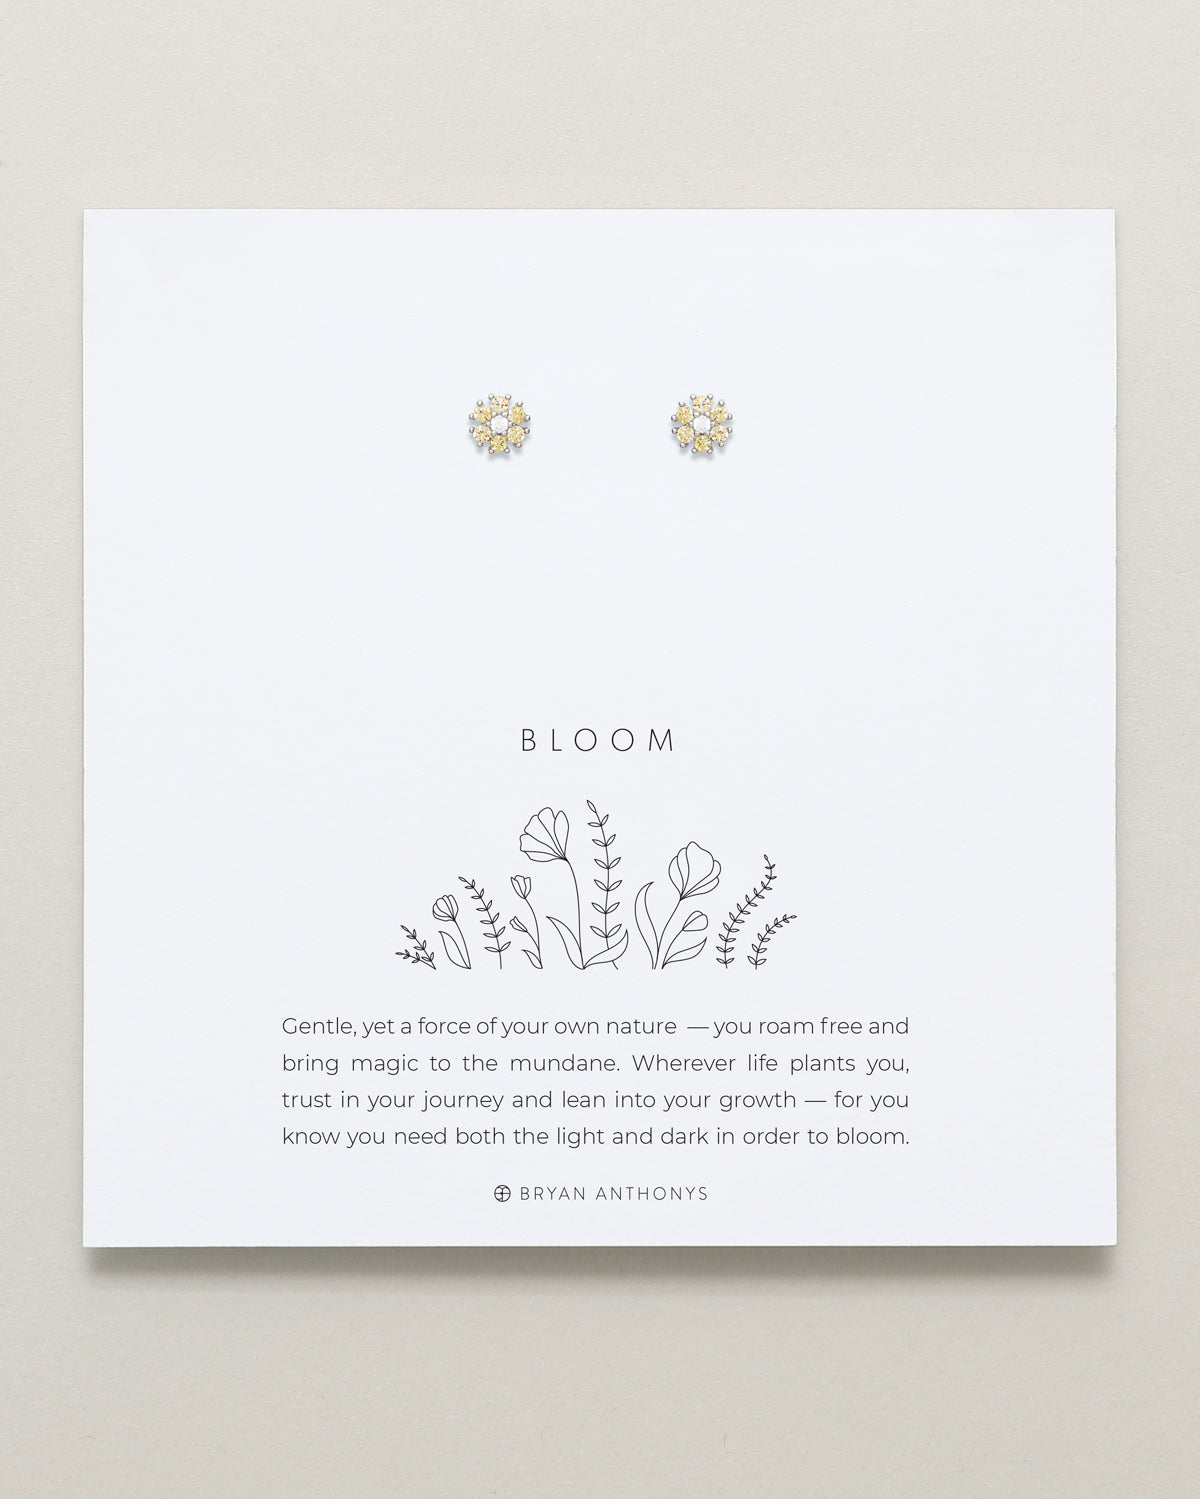 Bryan Anthonys Bloom Yellow Silver Stud Earrings On Card